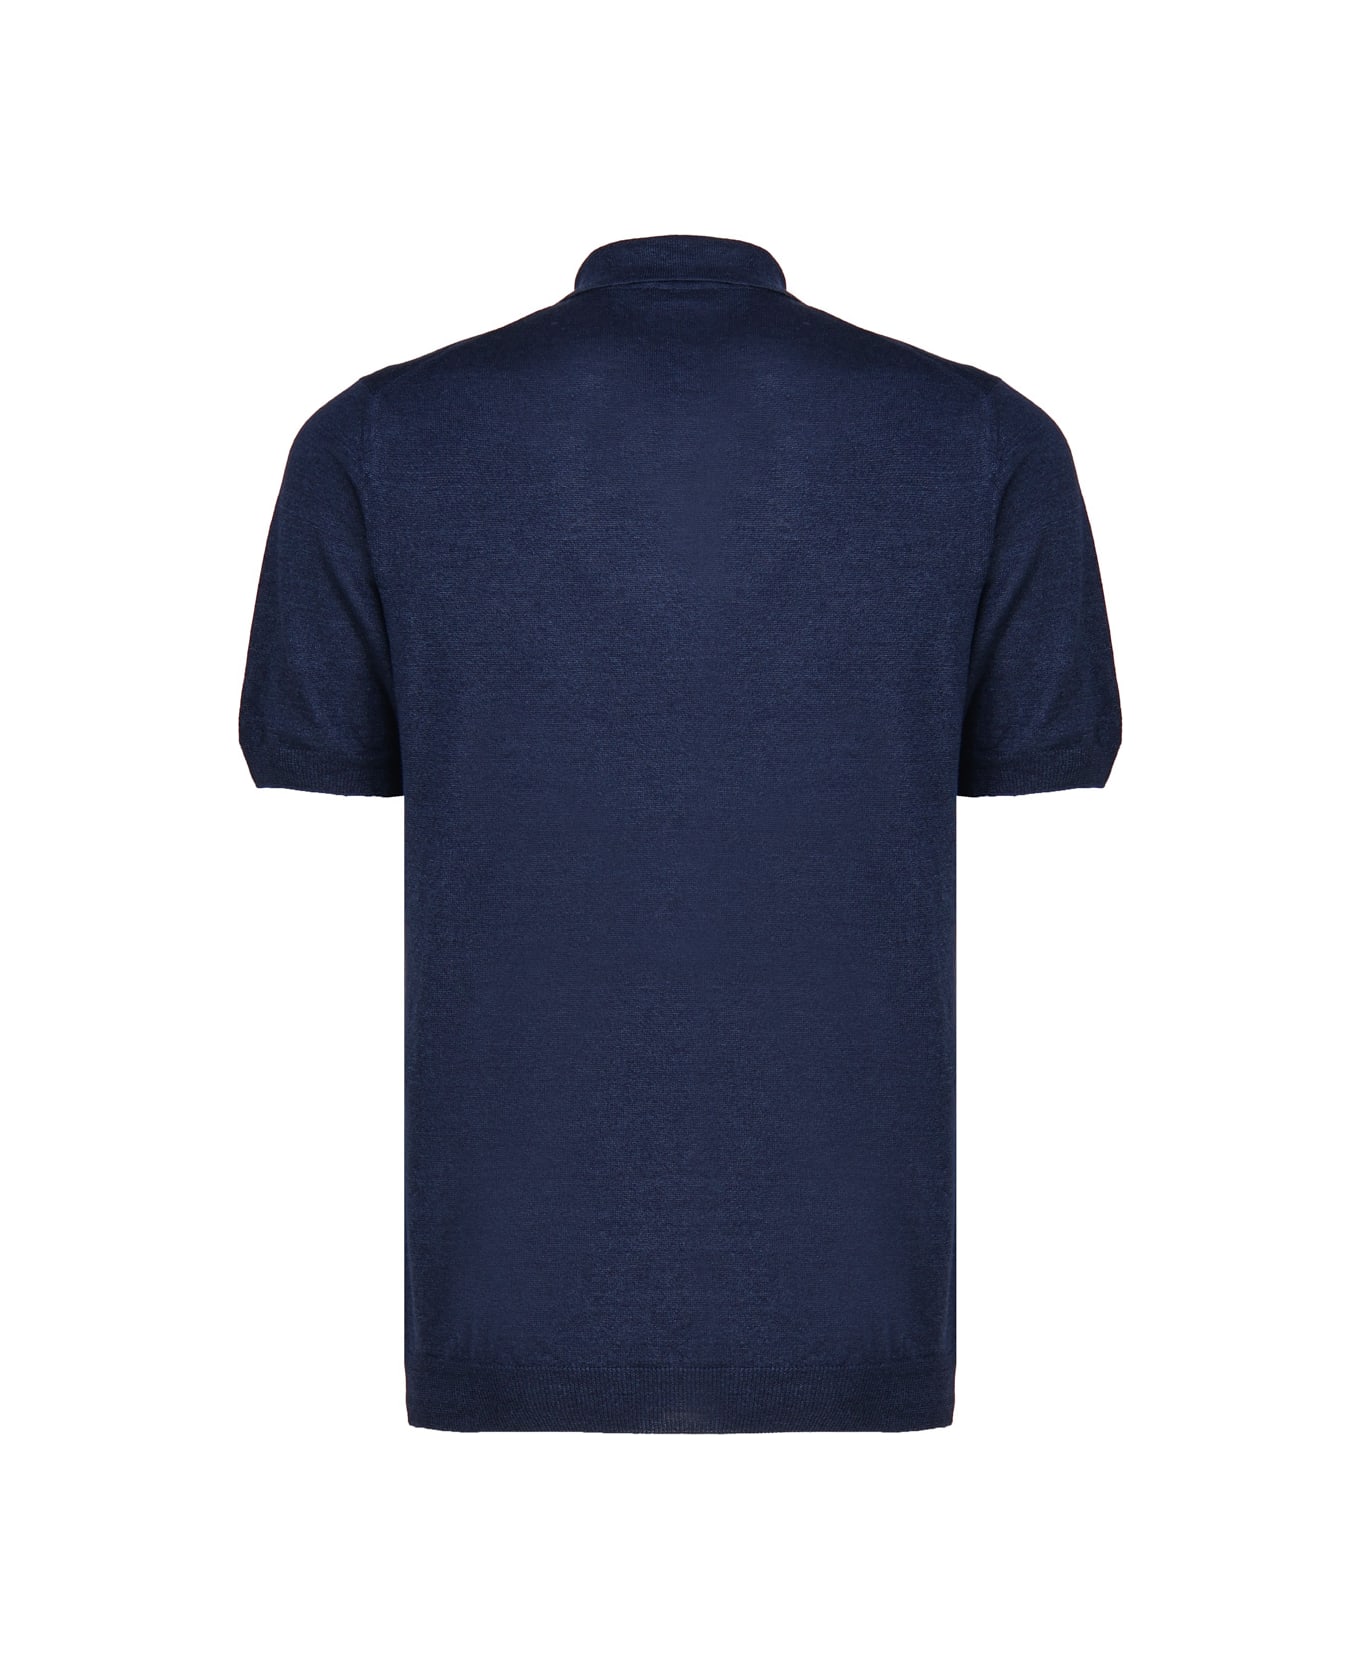 Fay Knitted Polo Shirt - Blue